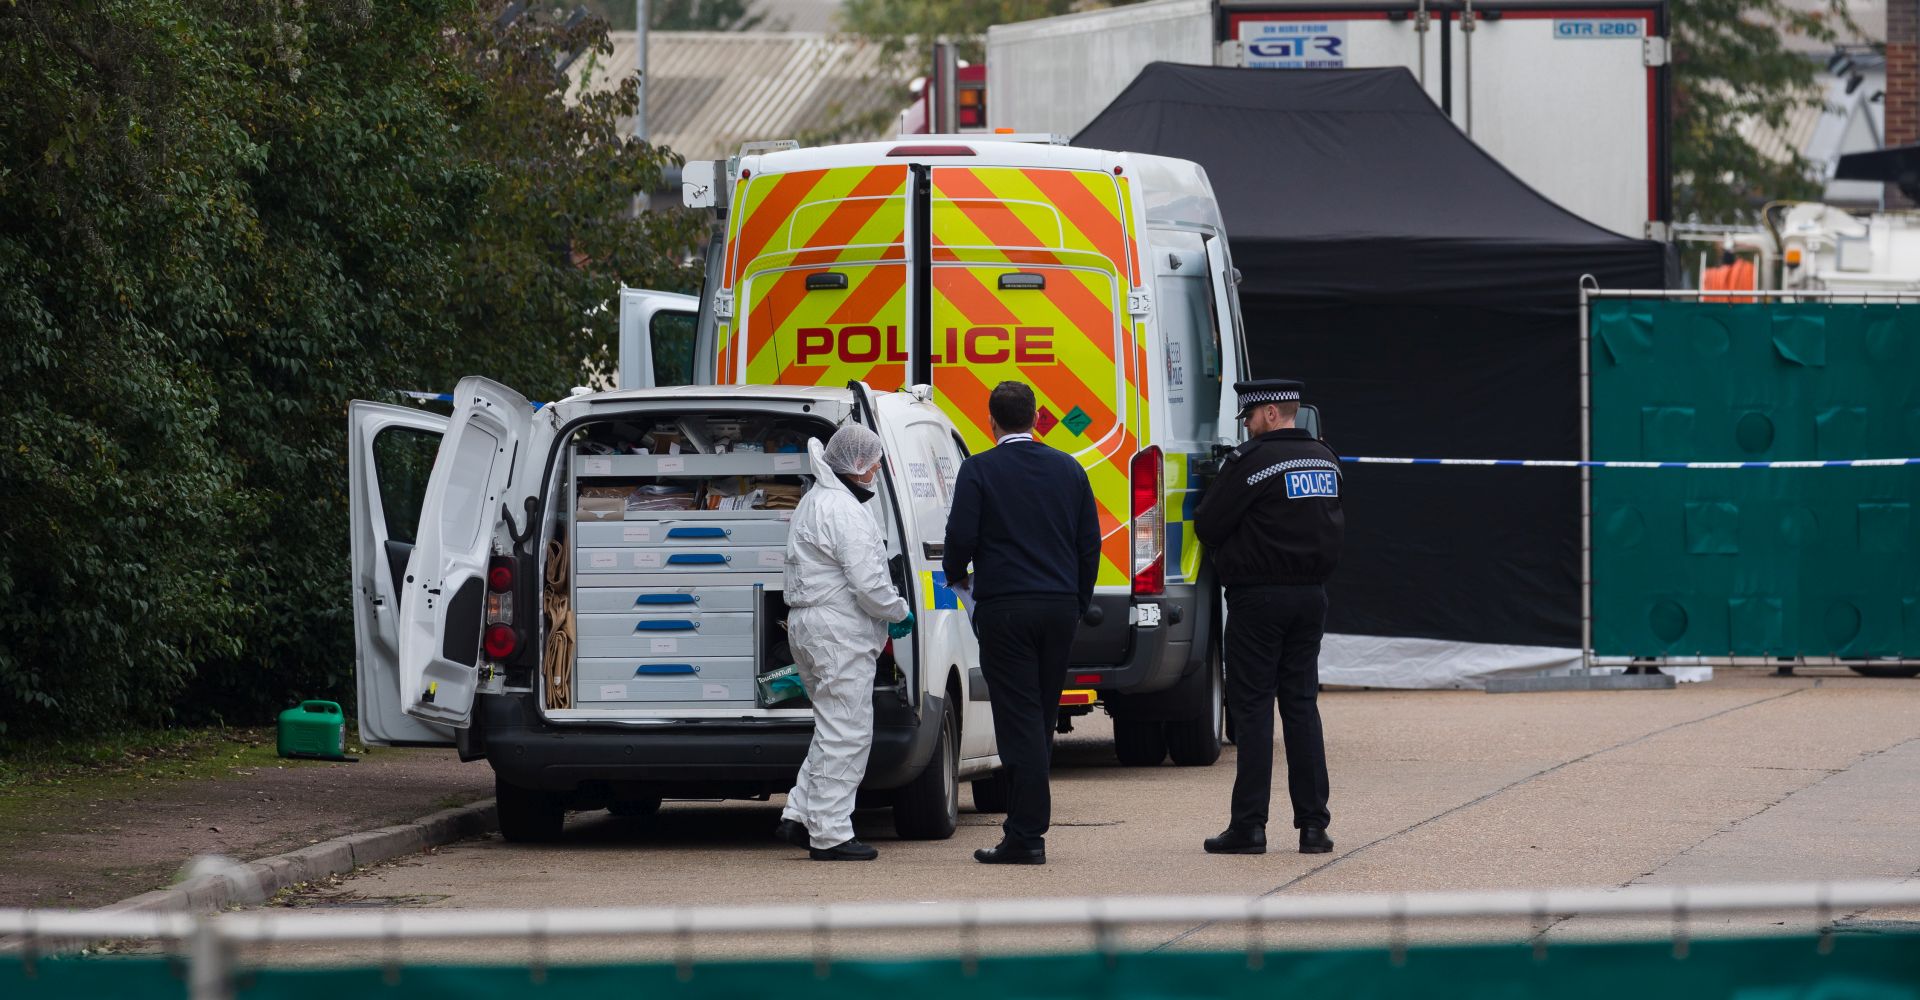 epa07942769 Police and forensic officers investigate at the scene in Waterglade Industrial Park in Grays, Essex, Britain, 23 October 2019. A total of 39 bodies were discovered inside a lorry container in the early hours of this morning, and pronounced dead at the scene.  EPA/VICKIE FLORES